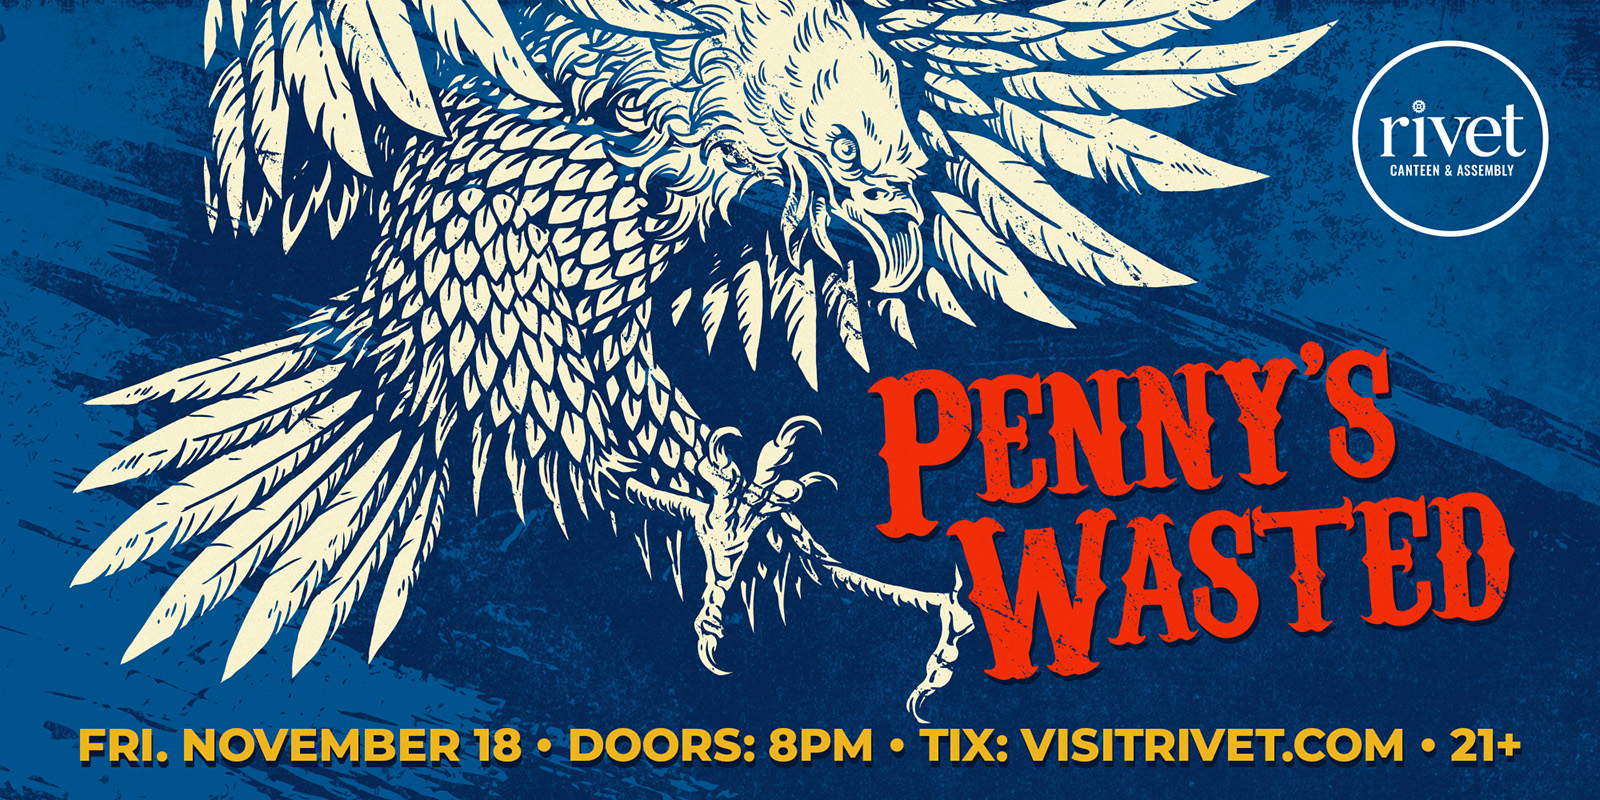 Penny's Wasted is making their Rivet: Canteen & Assembly debut on Friday November 18th. Join us!